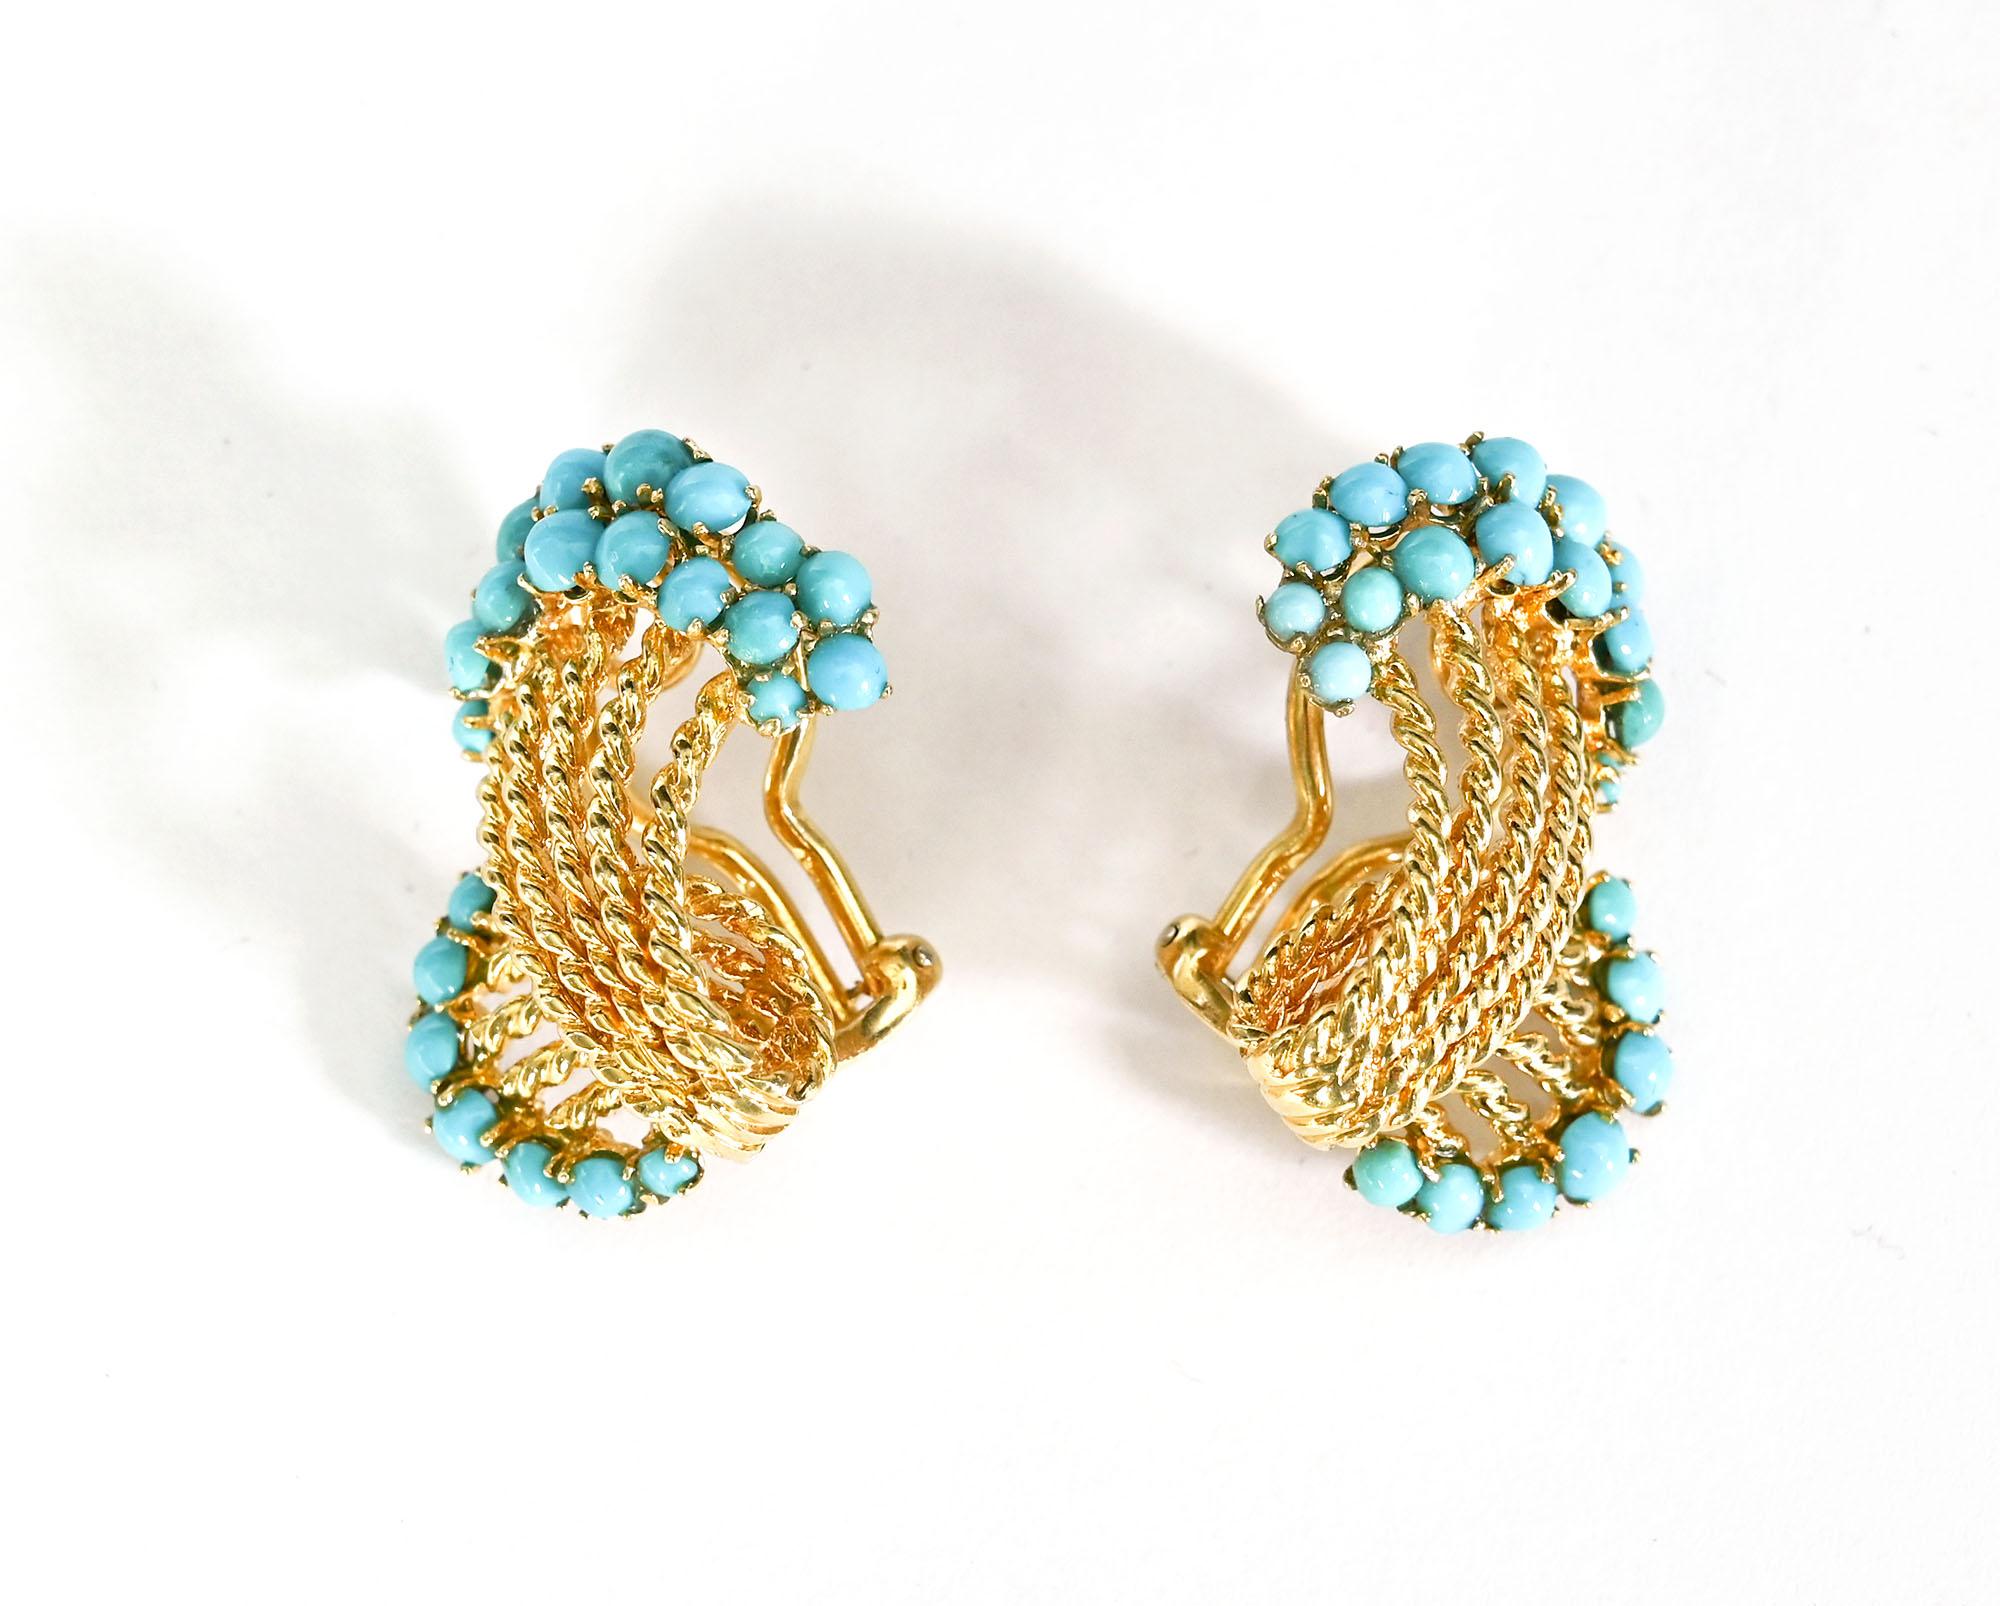 Lovely airy 14 karat twisted gold earrings terminating with cabochon turquoise stones.
The earrings are 7/8